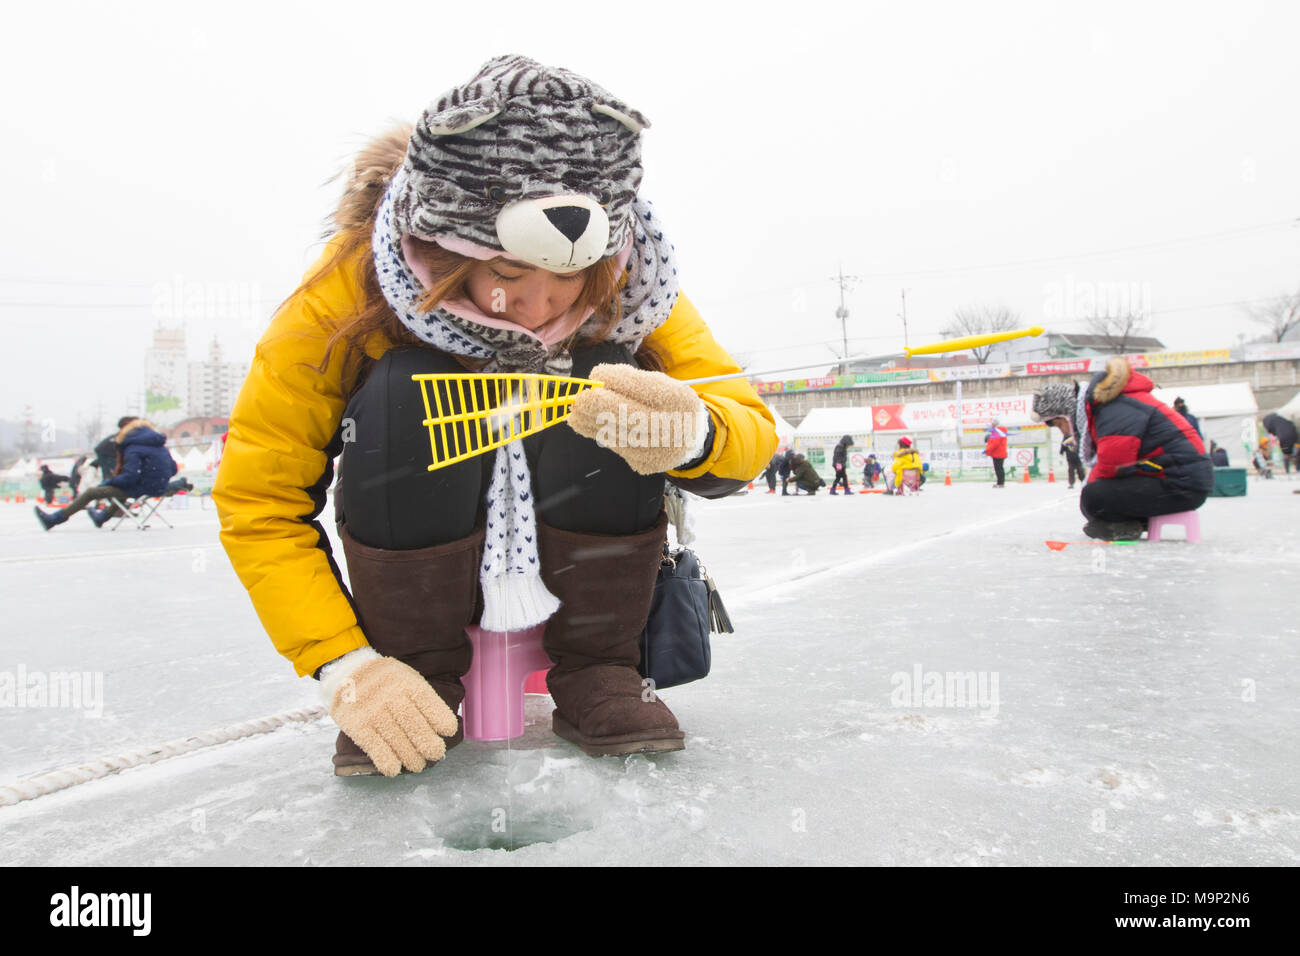 A warmly dressed woman is trying to catch a fish at a frozen river.  The Hwacheon Sancheoneo Ice Festival is a tradition for Korean people. Every year in January crowds gather at the frozen river to celebrate the cold and snow of winter. Main attraction is ice fishing. Young and old wait patiently over a small hole in the ice for a trout to bite. In tents they can let the fish grilled after which they are eaten. Among other activities are sledding and ice skating.  The nearby Pyeongchang region will host the Winter Olympics in February 2018. Stock Photo